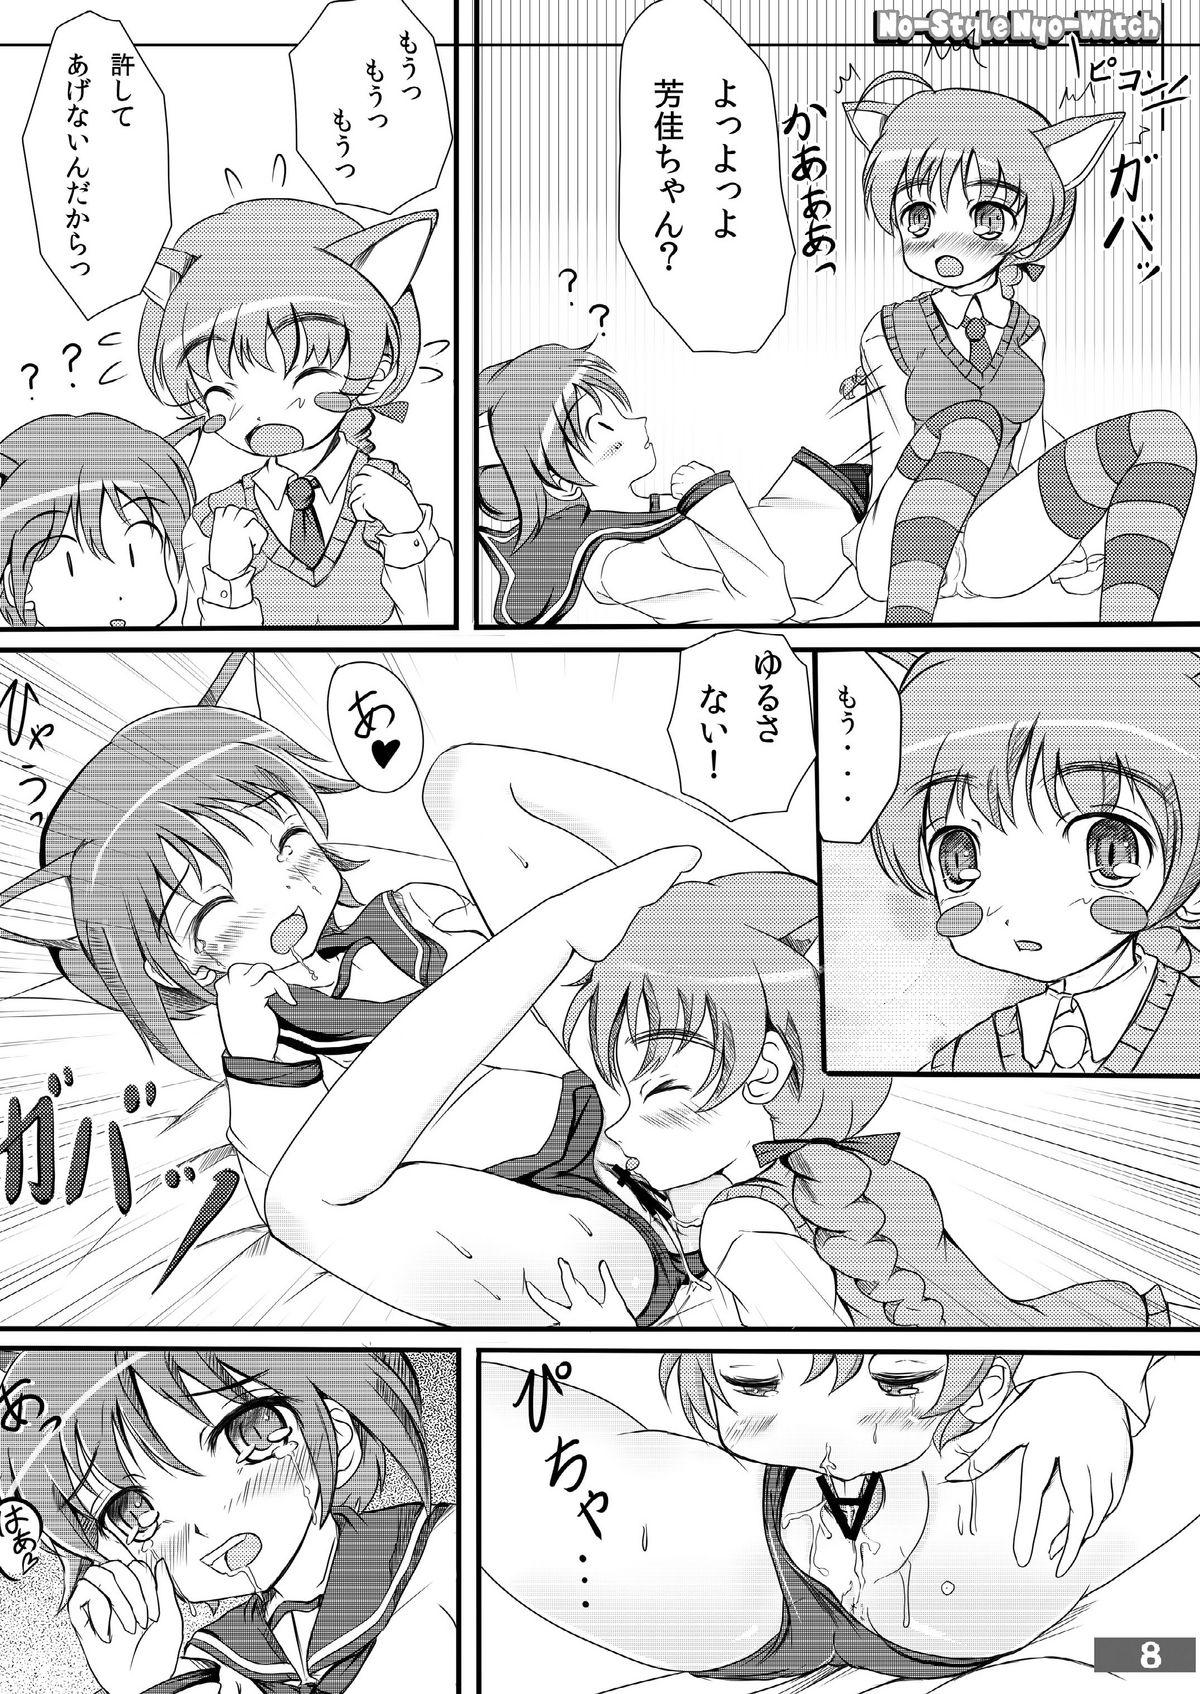 Foursome (C79) [kyabe's FACTORY (Kyabe Suke)] No-Style Nyo-Witch (Strike Witches) - Strike witches Exhibitionist - Page 8